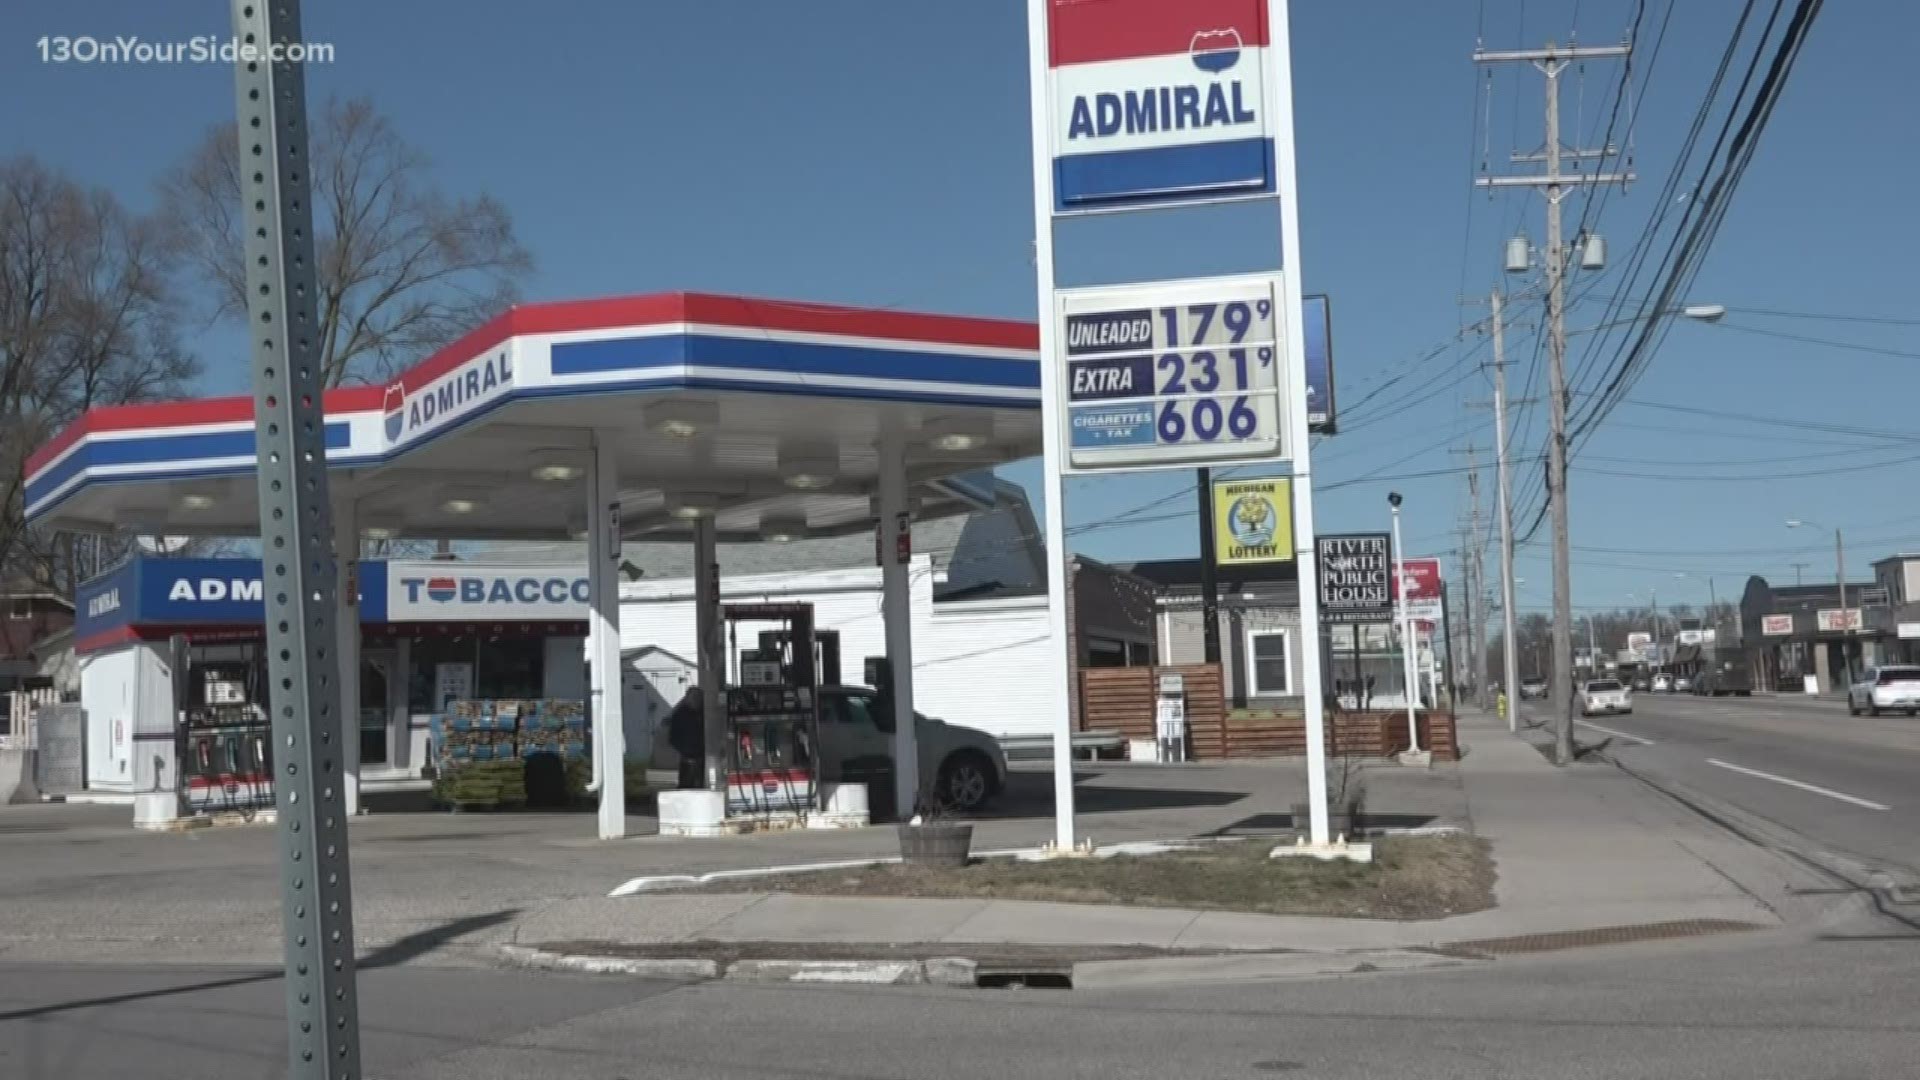 According to Gas Buddy, stations in the Detroit area are selling unleaded gas for as little as $1.49 per gallon.